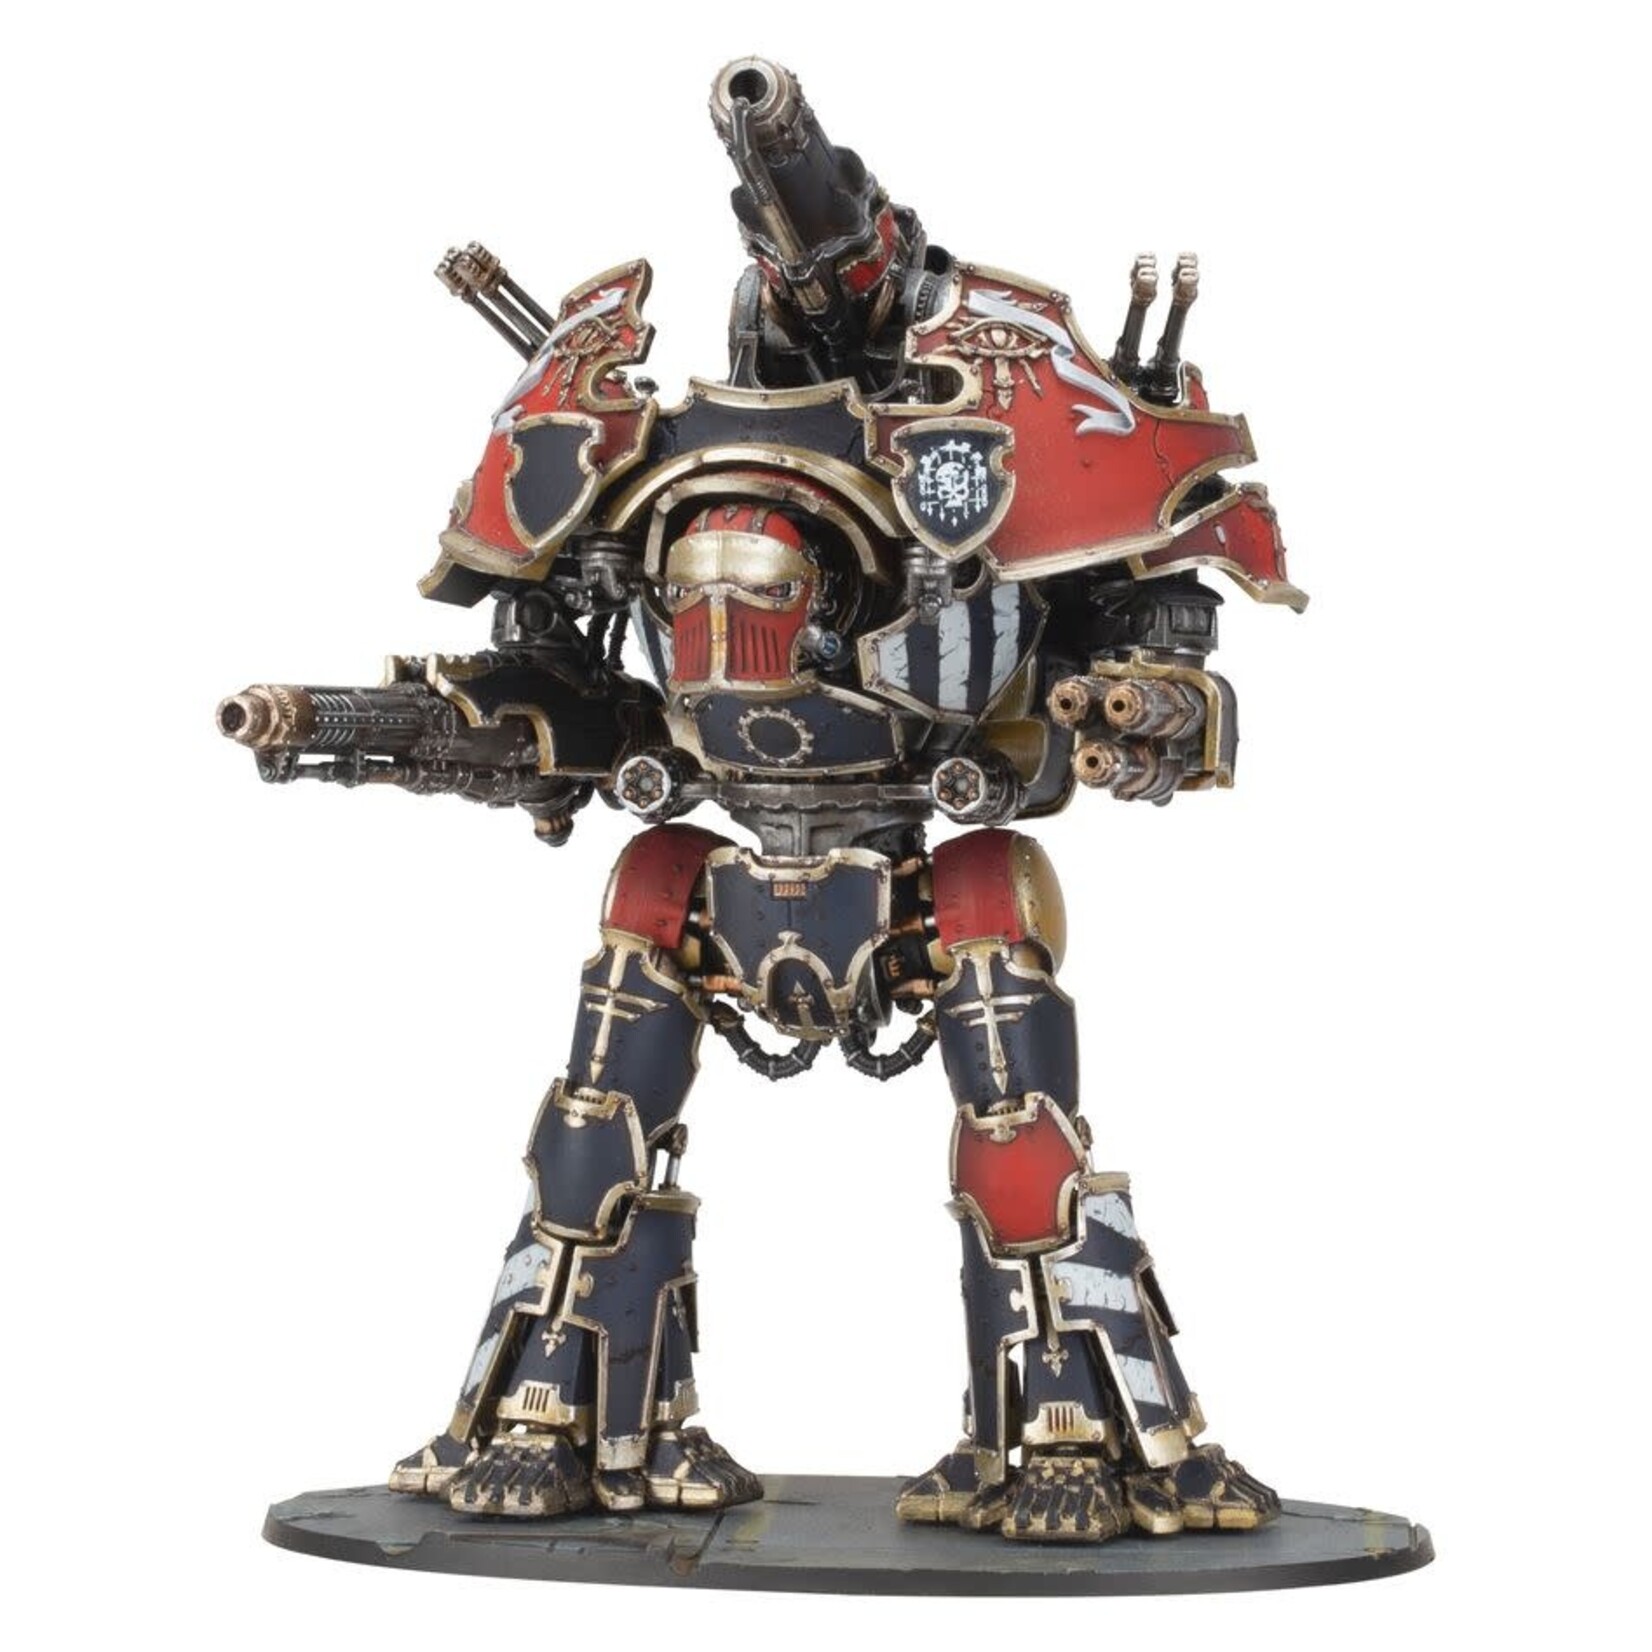 Games Workshop Legions Imperialis: Warbringer Nemesis Titan with Quake Cannon, Volcano Cannon, and Laser Blaster